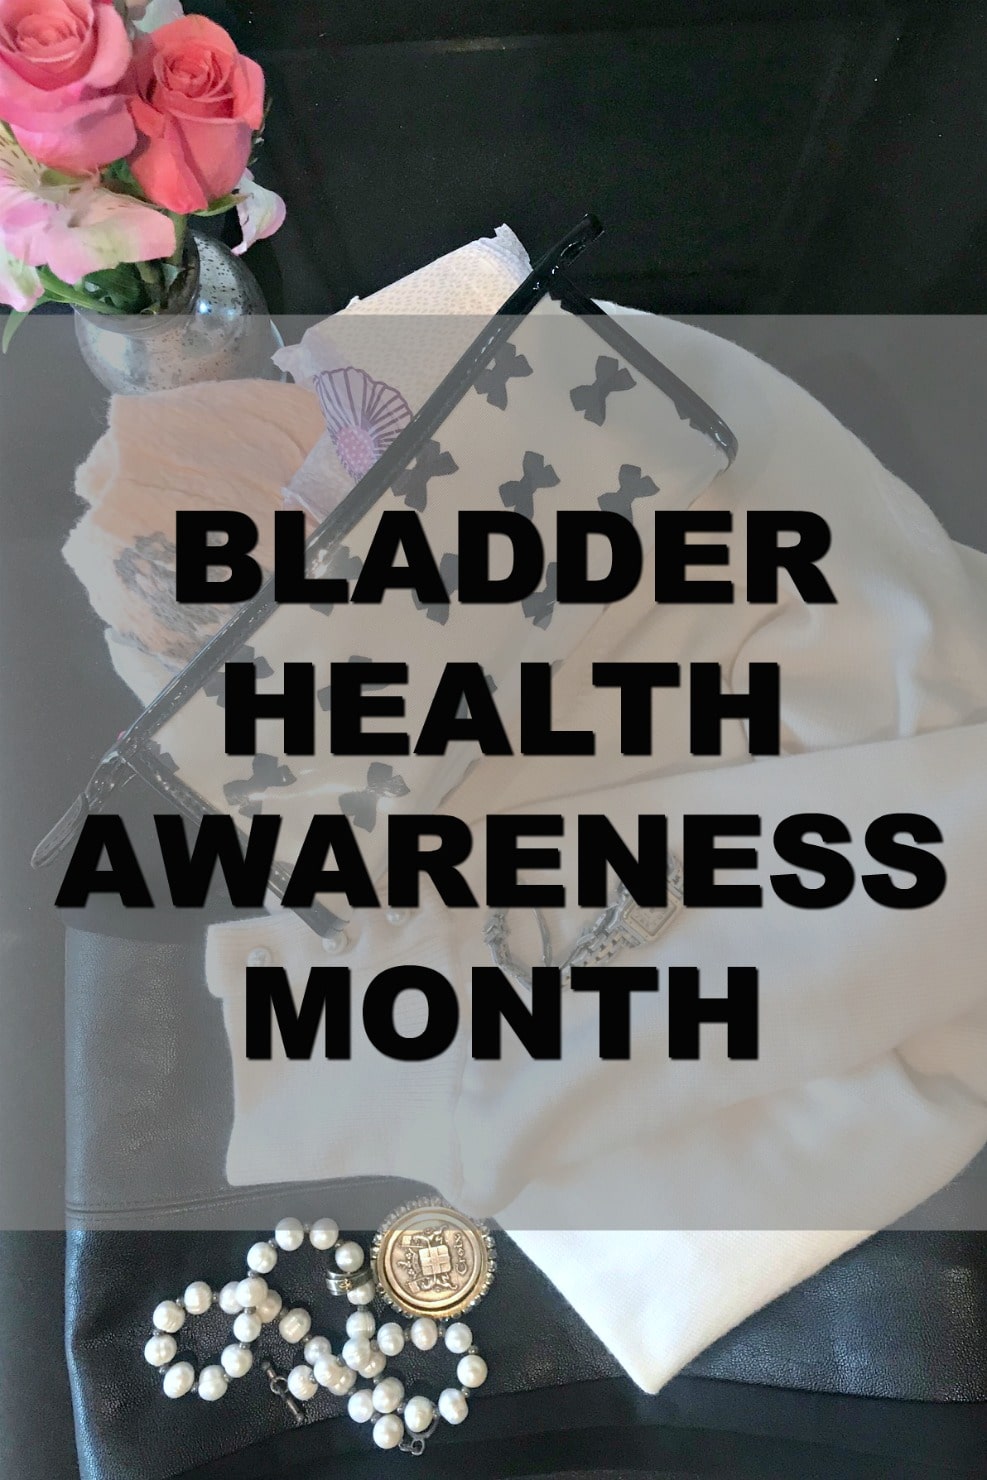 Always Discreet and Bladder Health Awareness month on A Well Styled Life